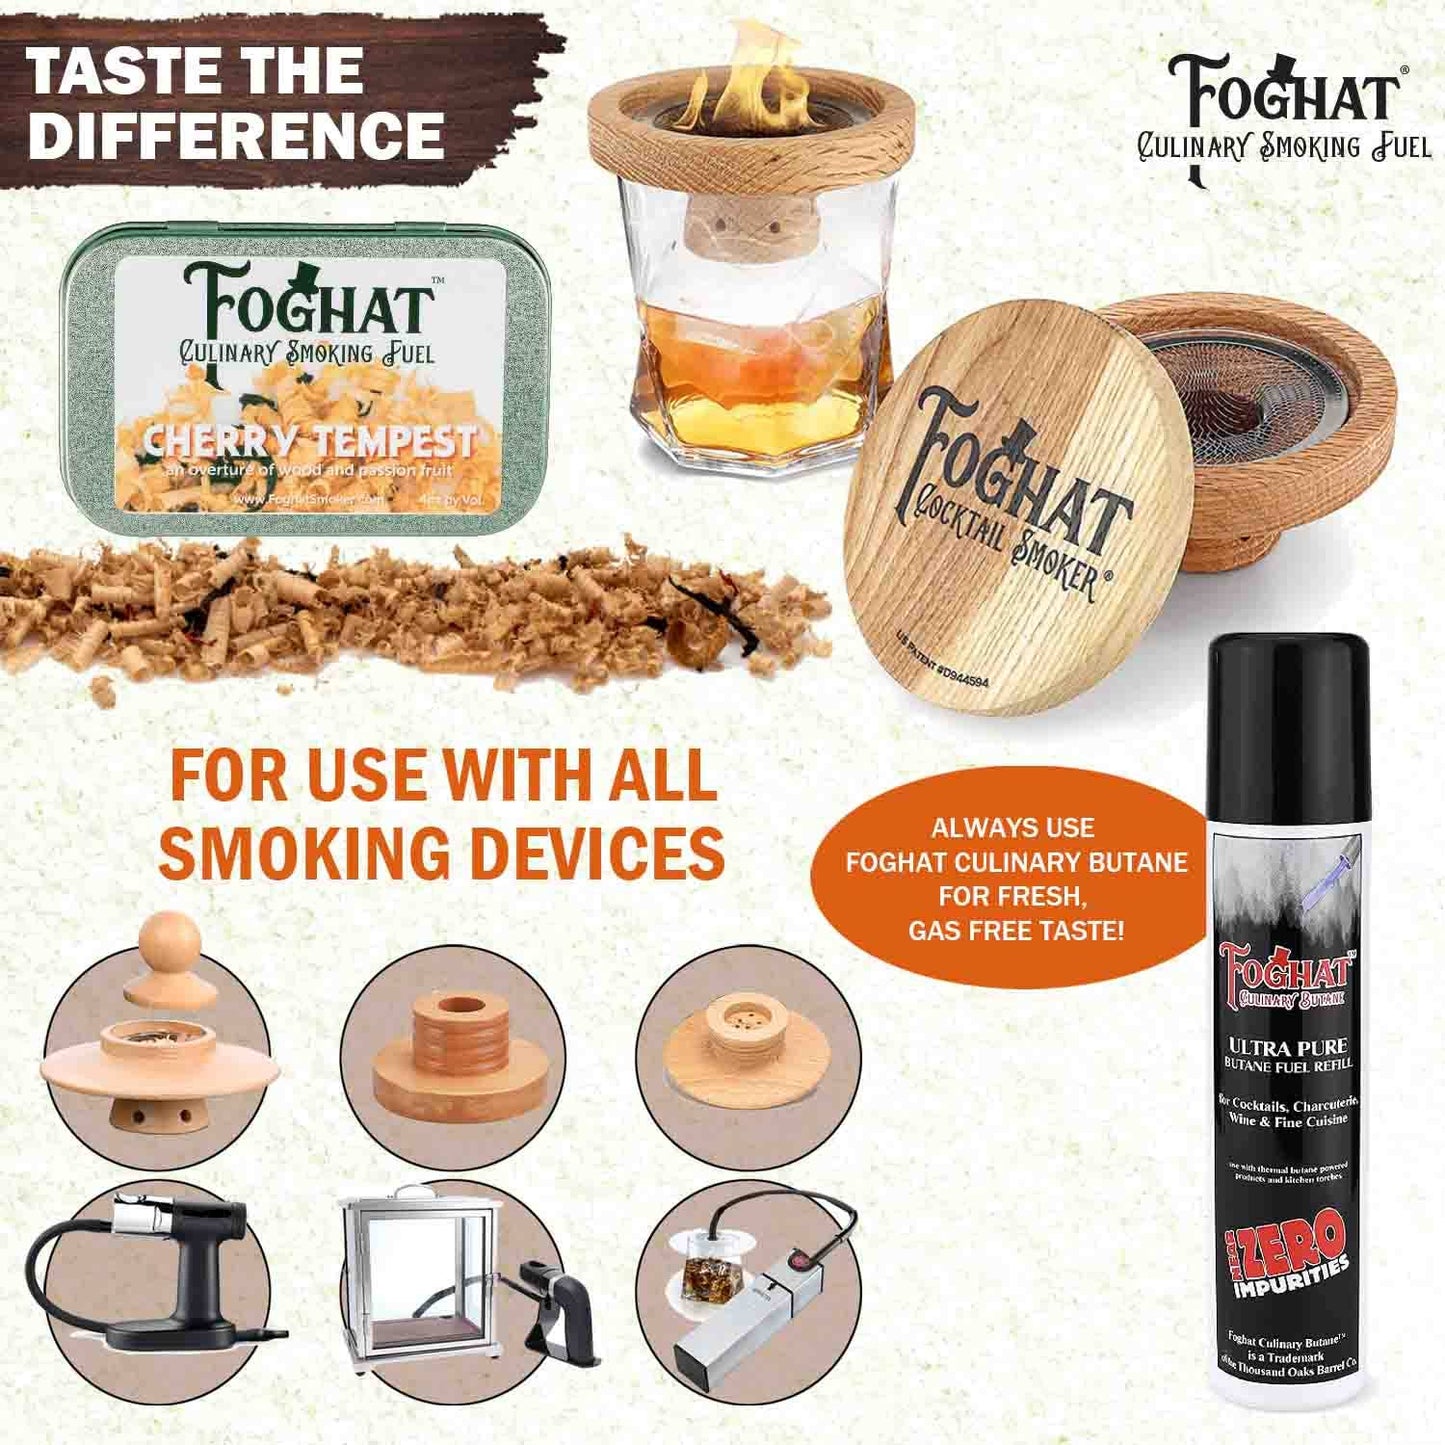 Cherry Tempest - Foghat Culinary Smoking Fuel - The Tool Store